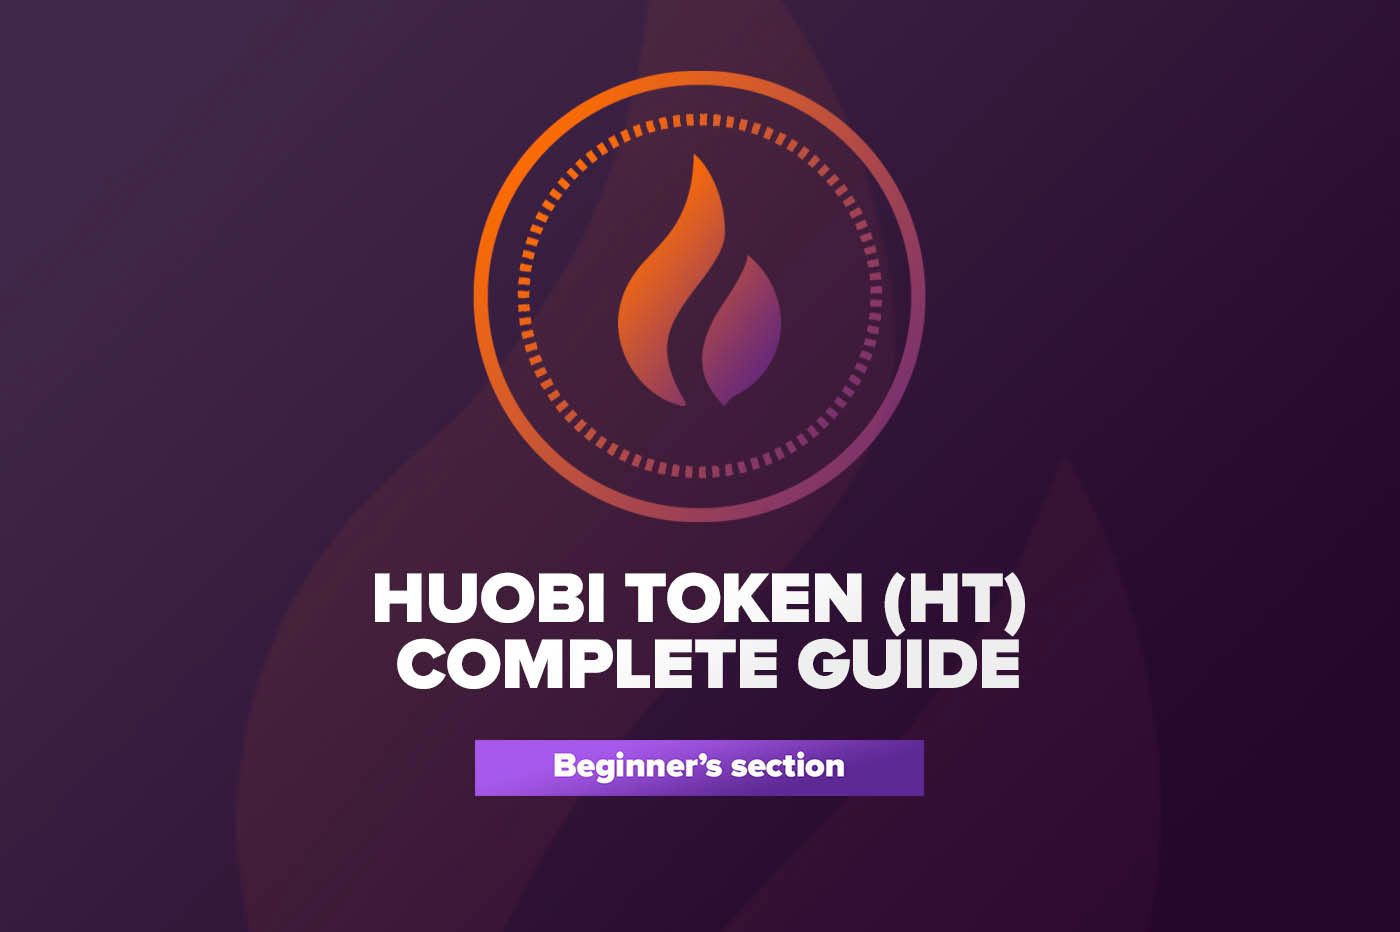 Article All You Need to Know About Huobi Token: Complete Guide